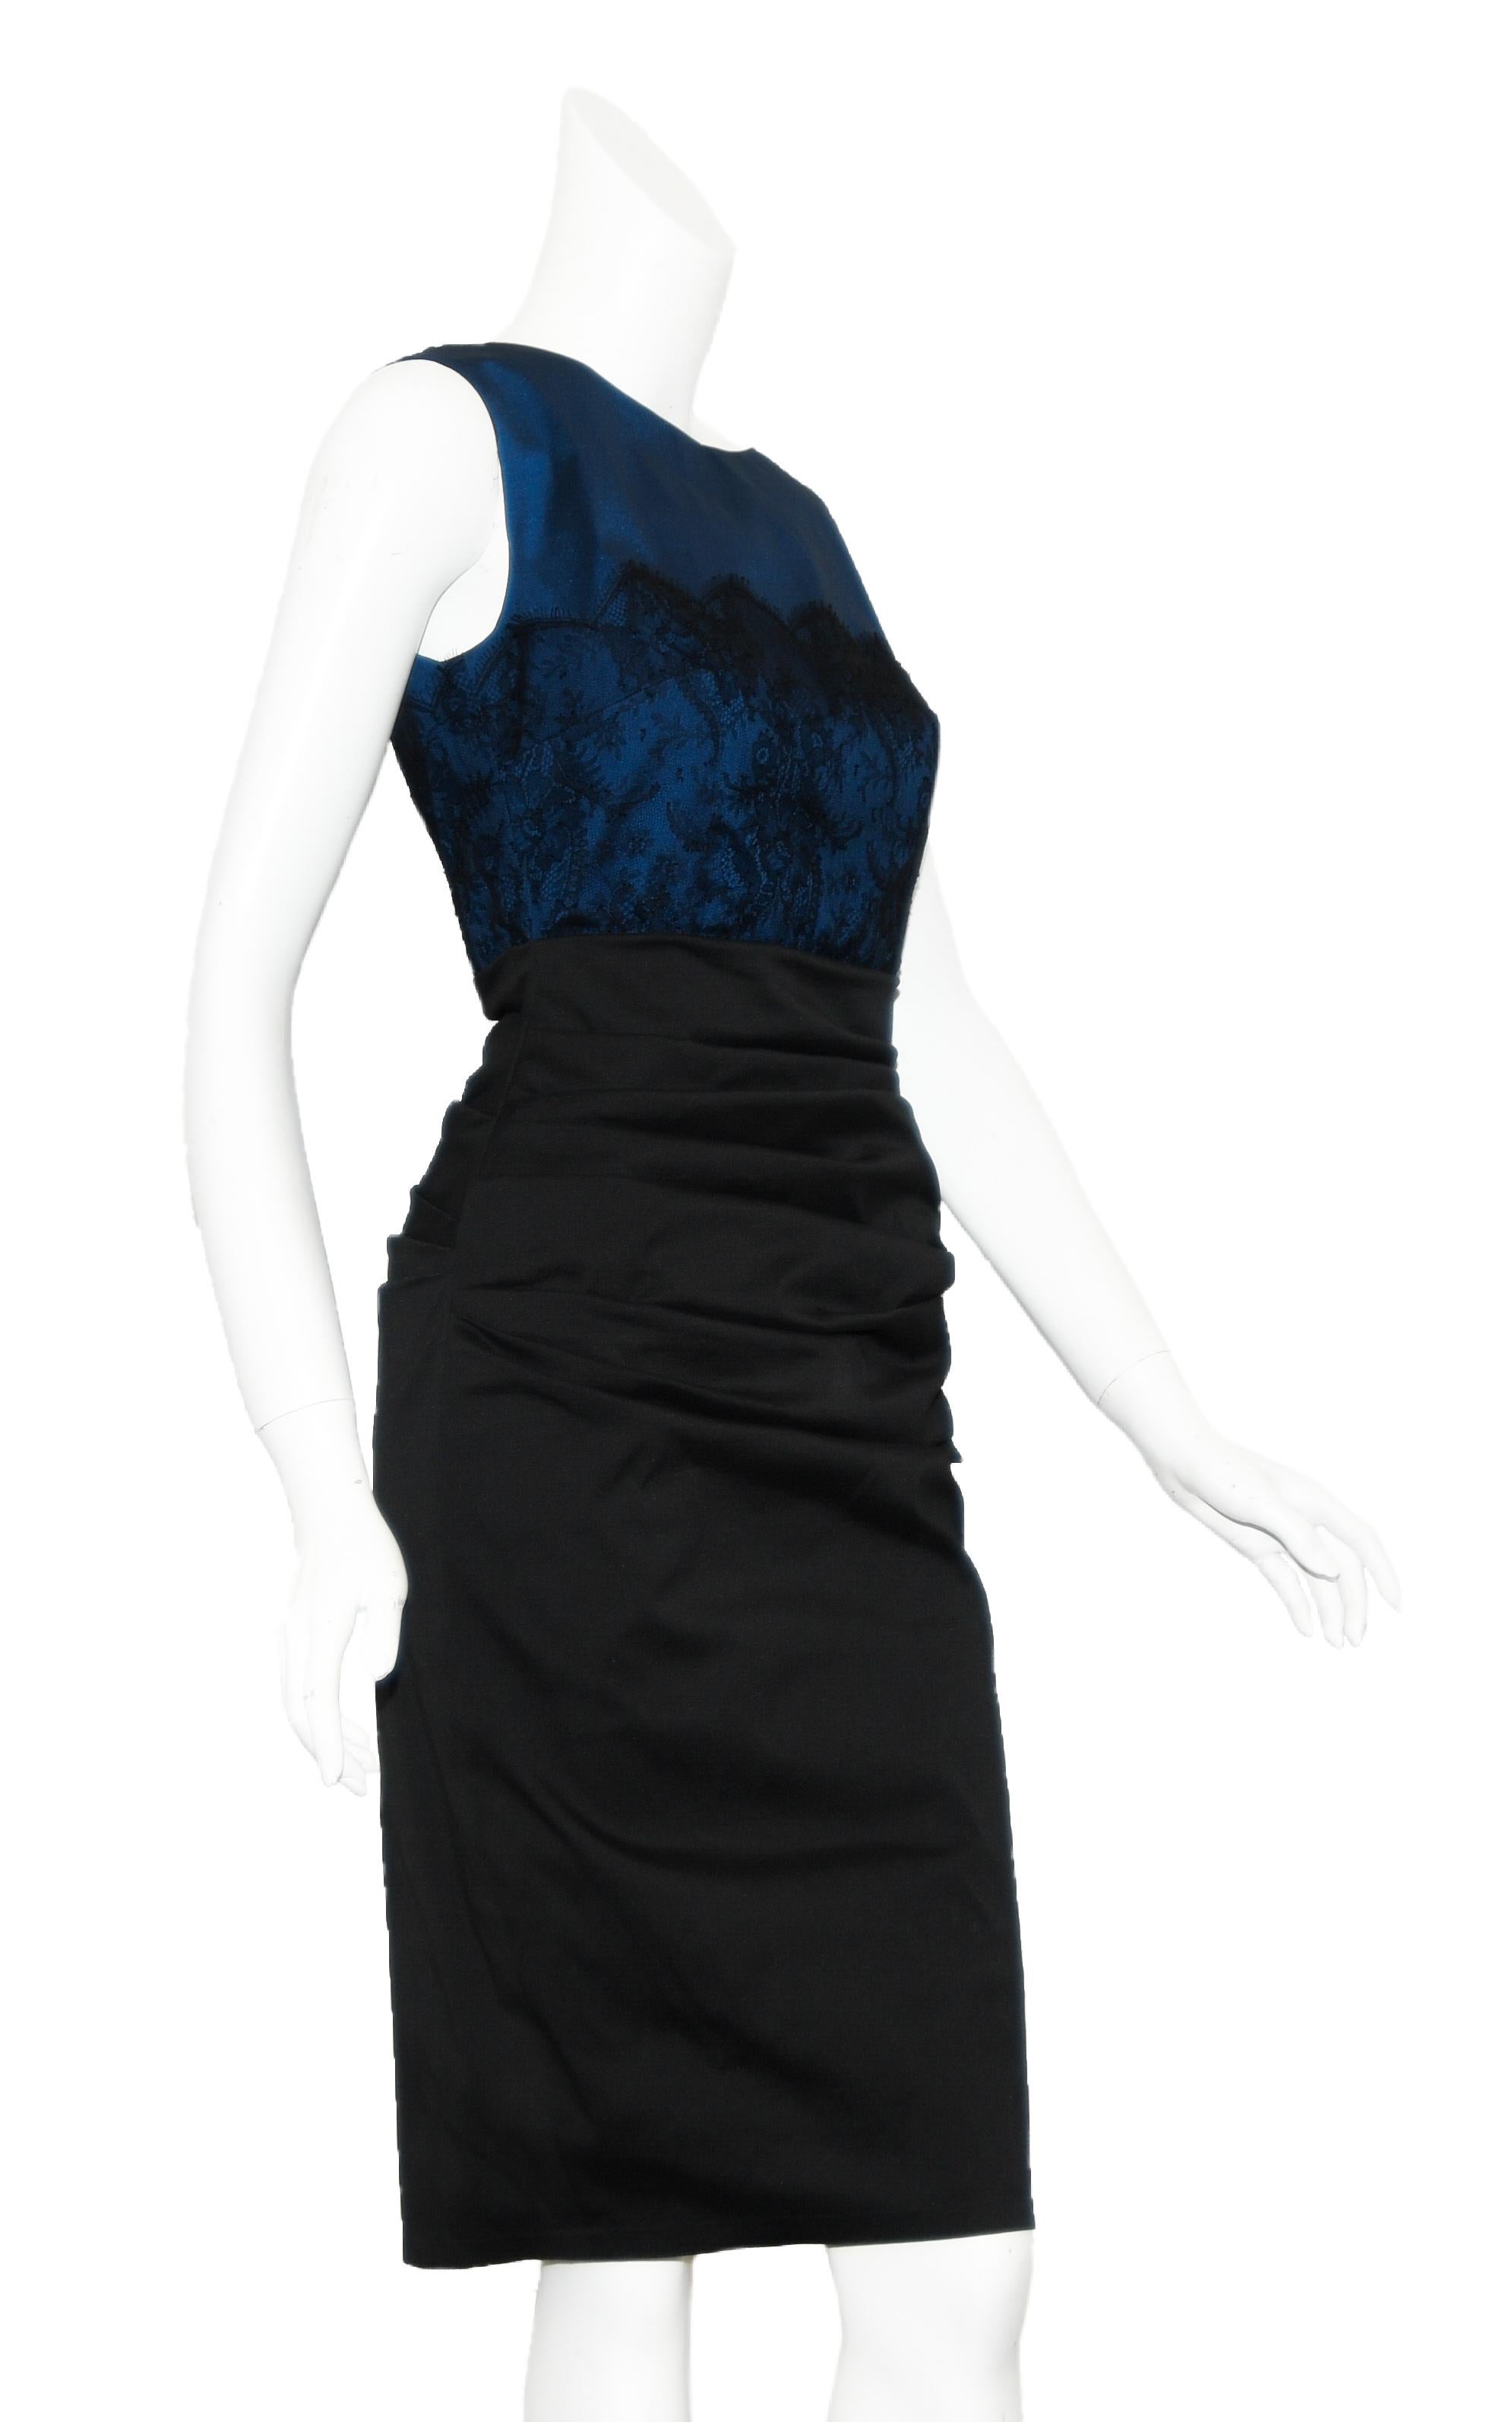 Talbot Runhof royal blue bodice with black lace overlay incorporates a bateau neckline.  This horizontal ruched dress has a fitted silhouette.   For closure a hidden zipper at back and finishes at the knee.  Dress is lined in black silk blend